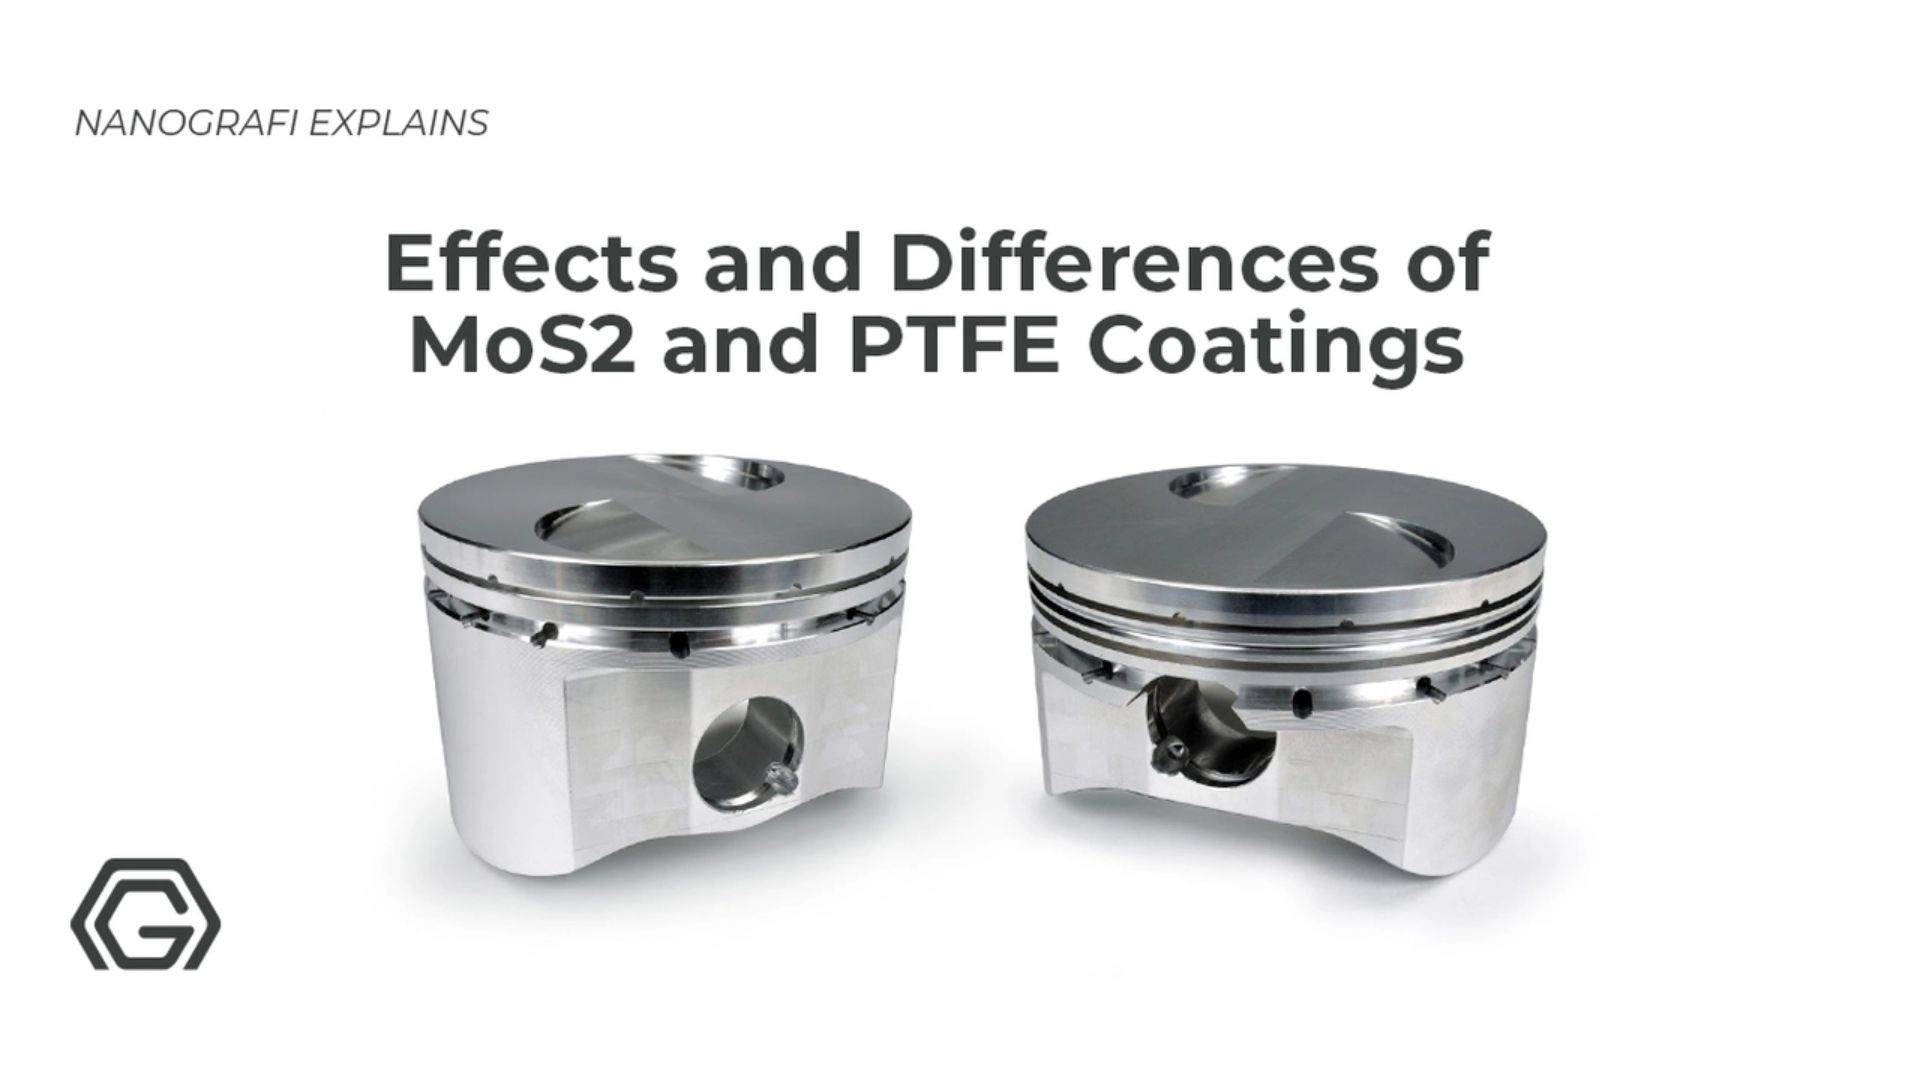 Effects and differences of MoS2 and PTFE coatings